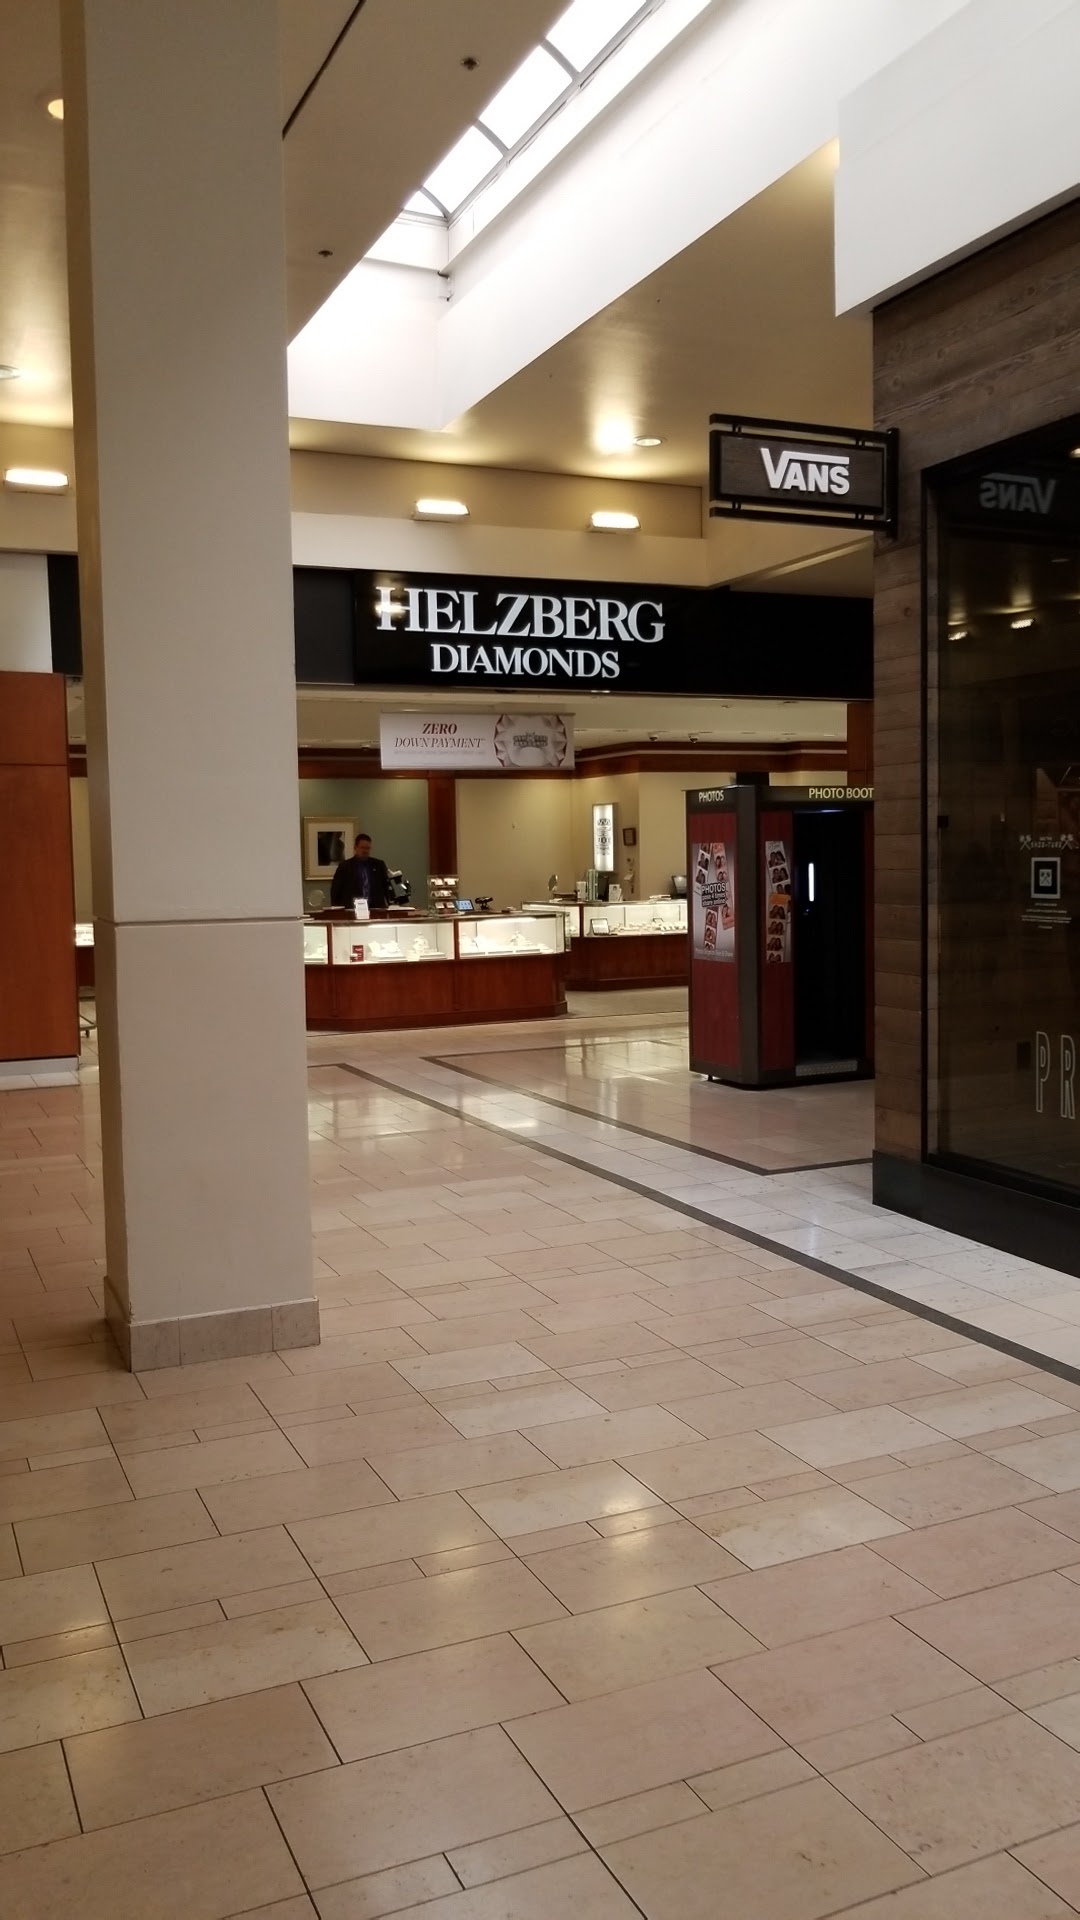 Helzberg Diamonds - Storewide Sell-Off Event, This location only